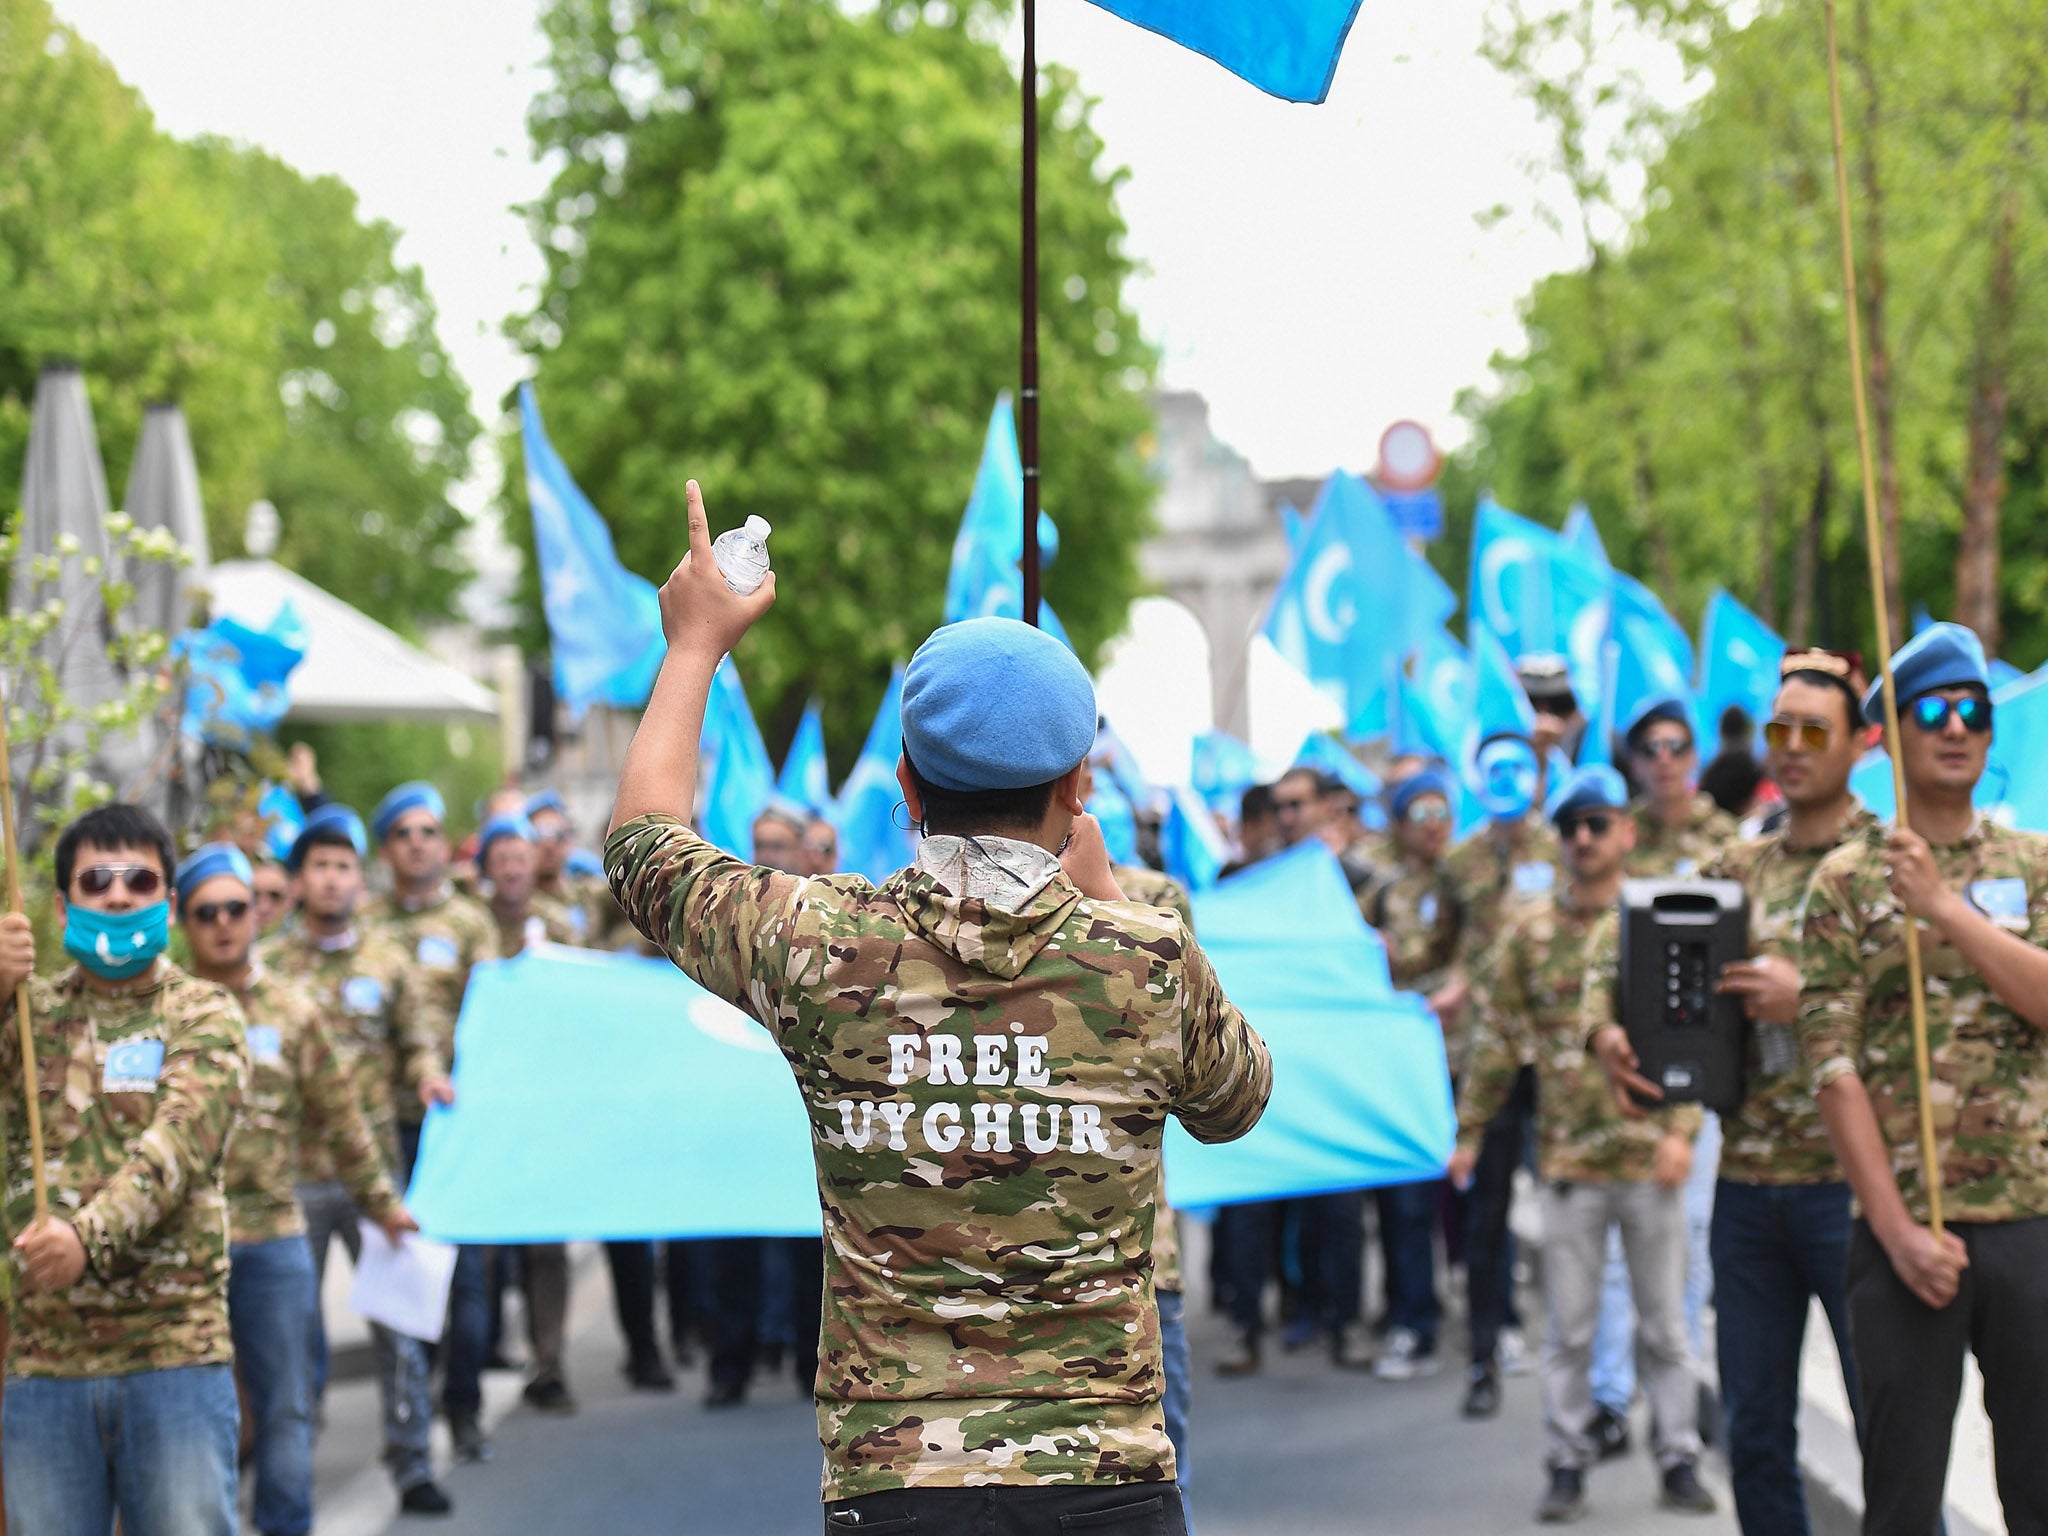 Uighur demonstrators in Brussels in April urge EU politicians to act against what they claim is a campaign to crush religious and cultural freedom in China